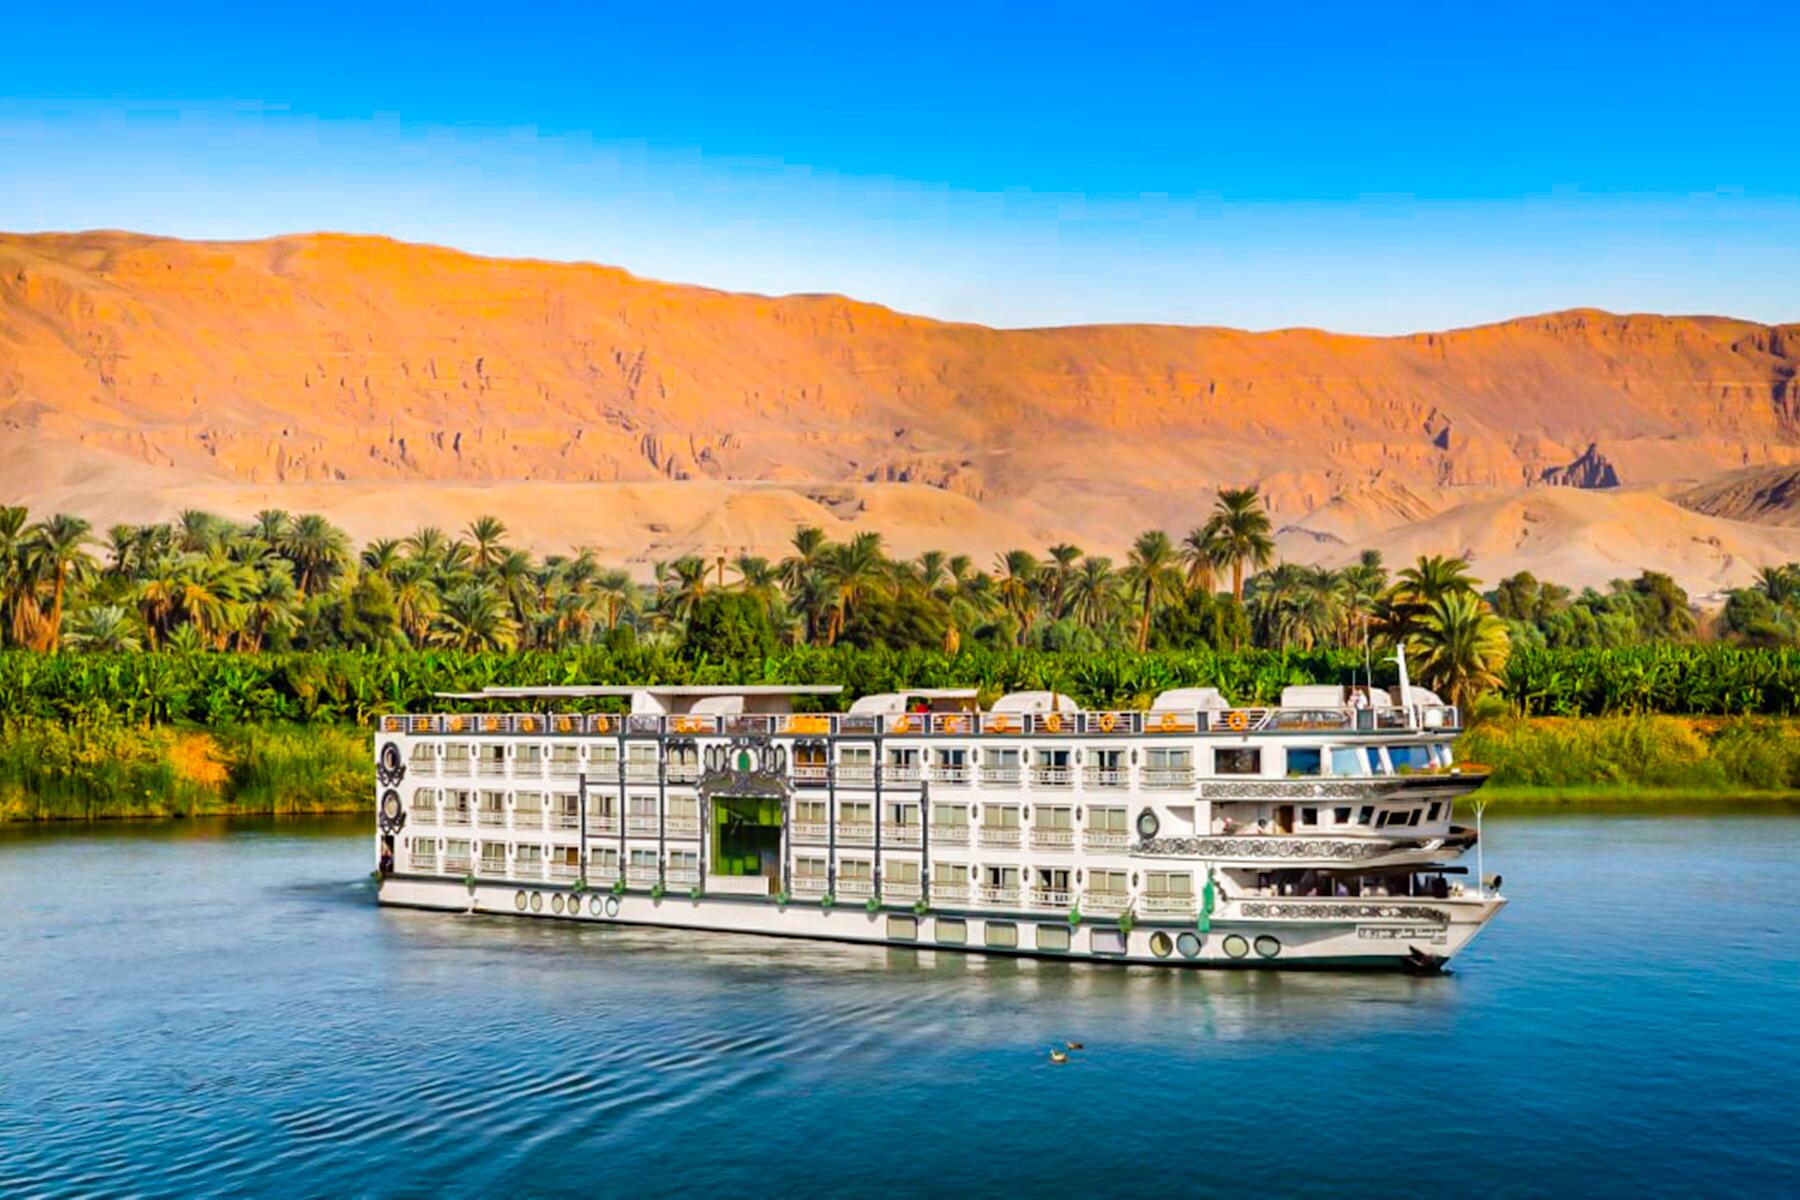 Travel To Egypt With These 13 Tour Companies 